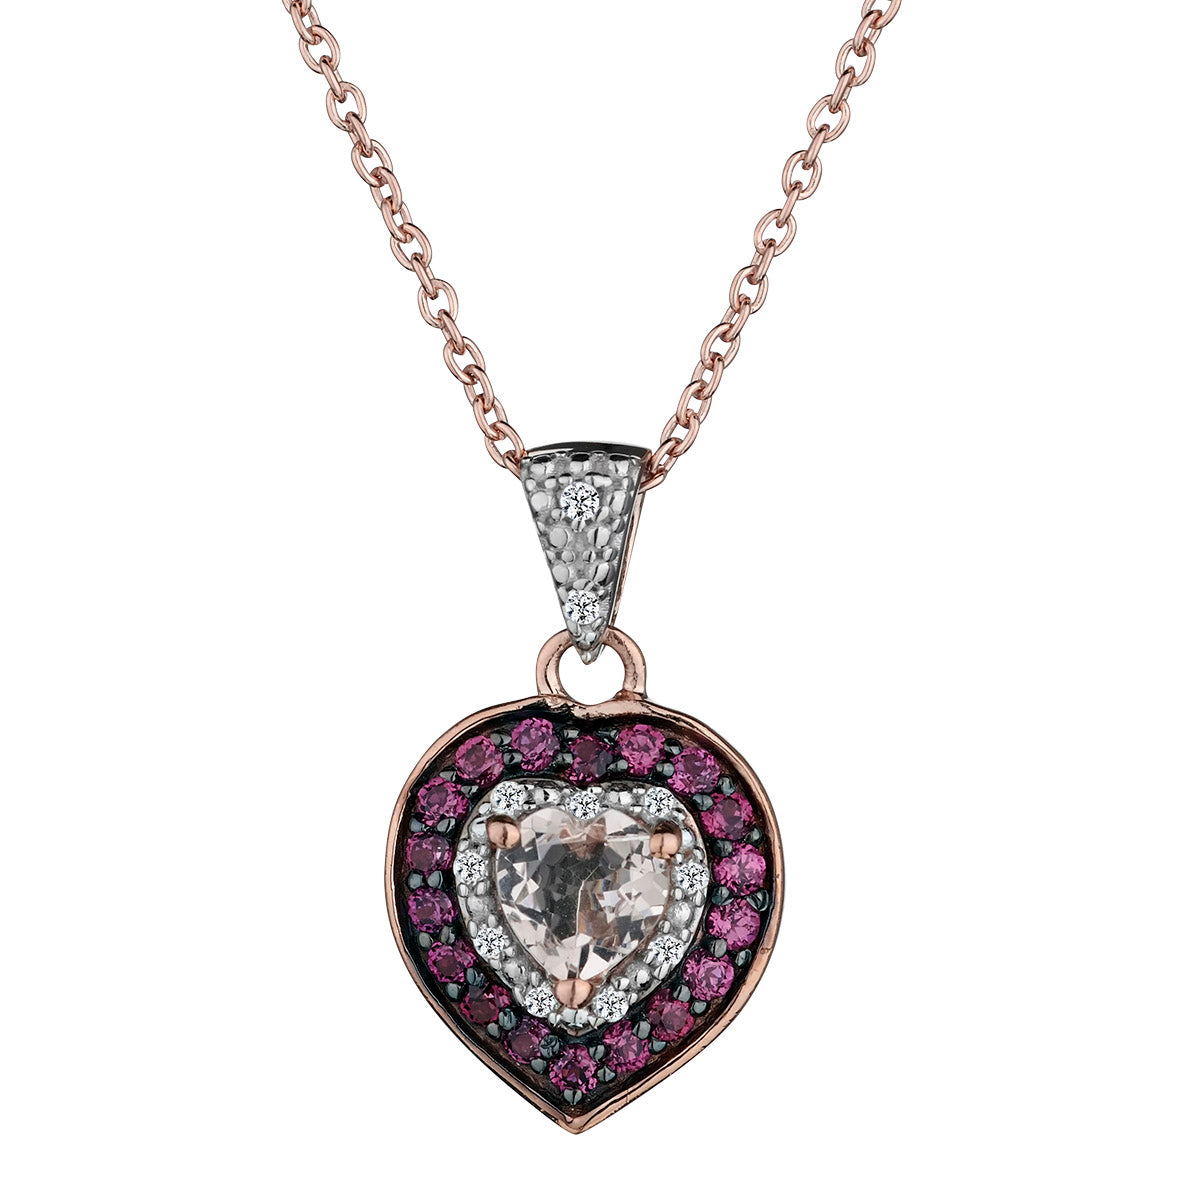 1.36 Carat Genuine Morganite and Rhodolite Heart Pendant,  Sterling Silver (14kt Rose Gold Plated). Necklaces and Pendants. Griffin Jewellery Designs. 